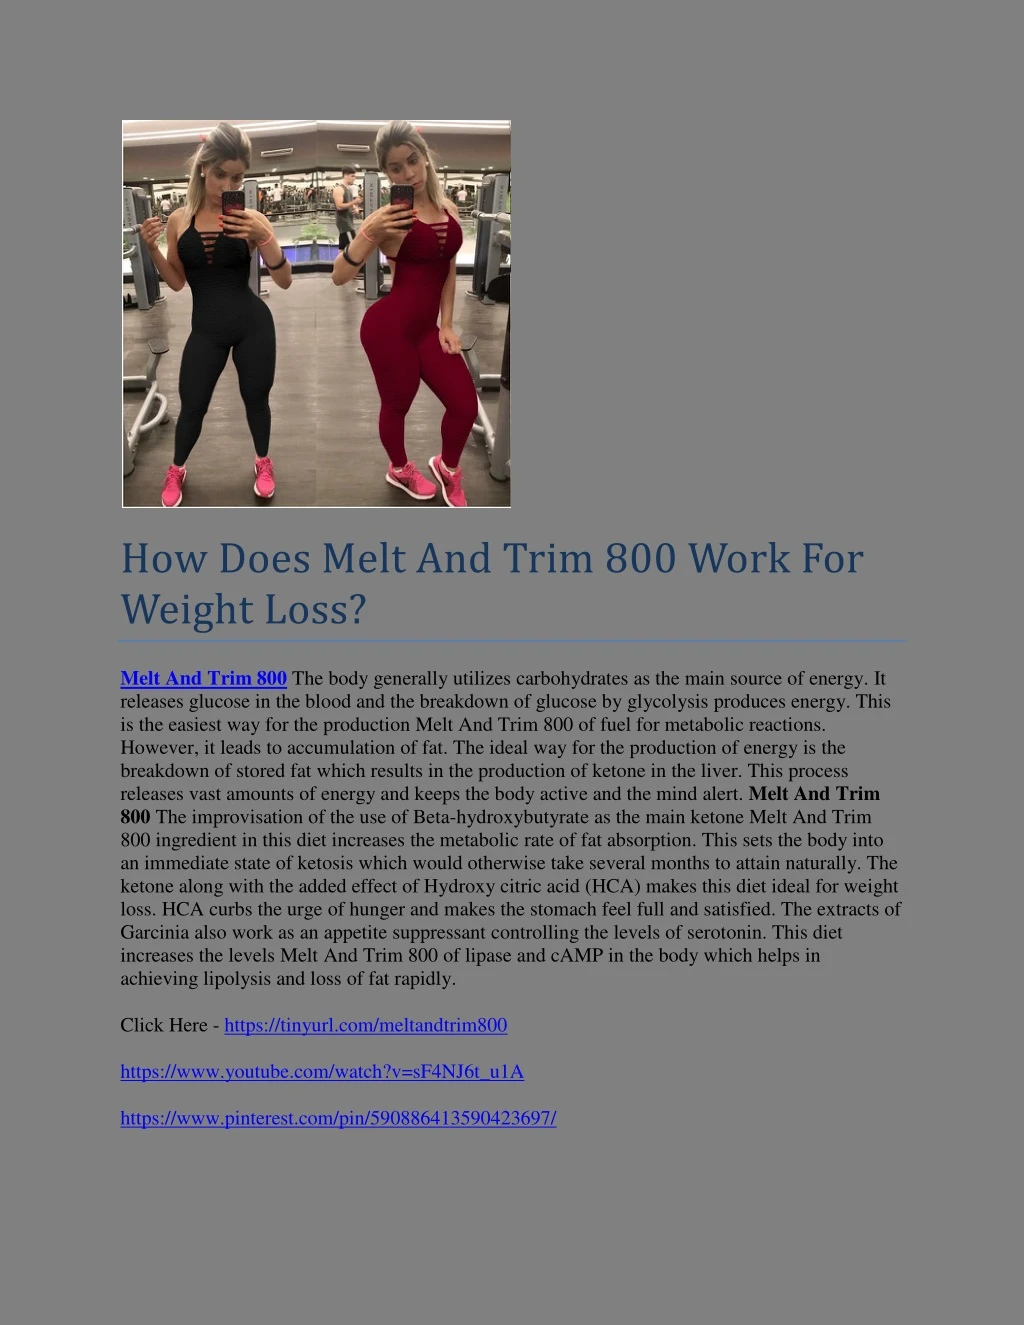 how does melt and trim 800 work for weight loss